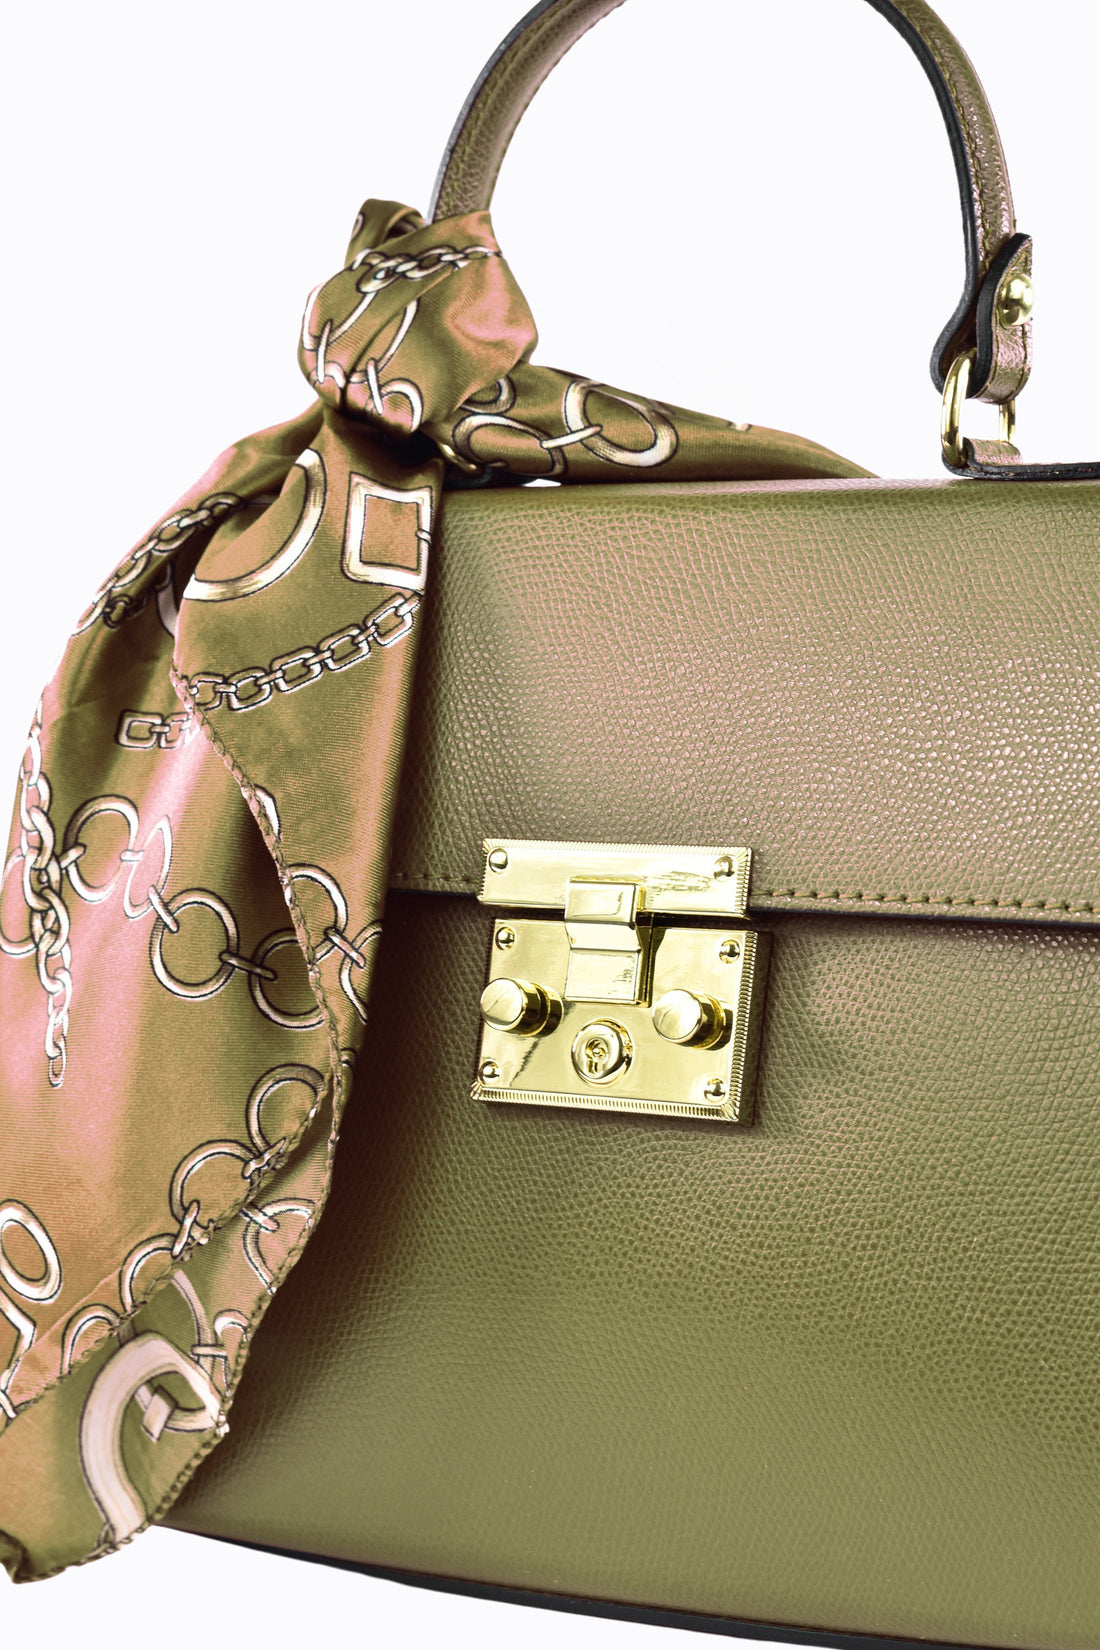 Marigold bag in Olive Green saffiano leather